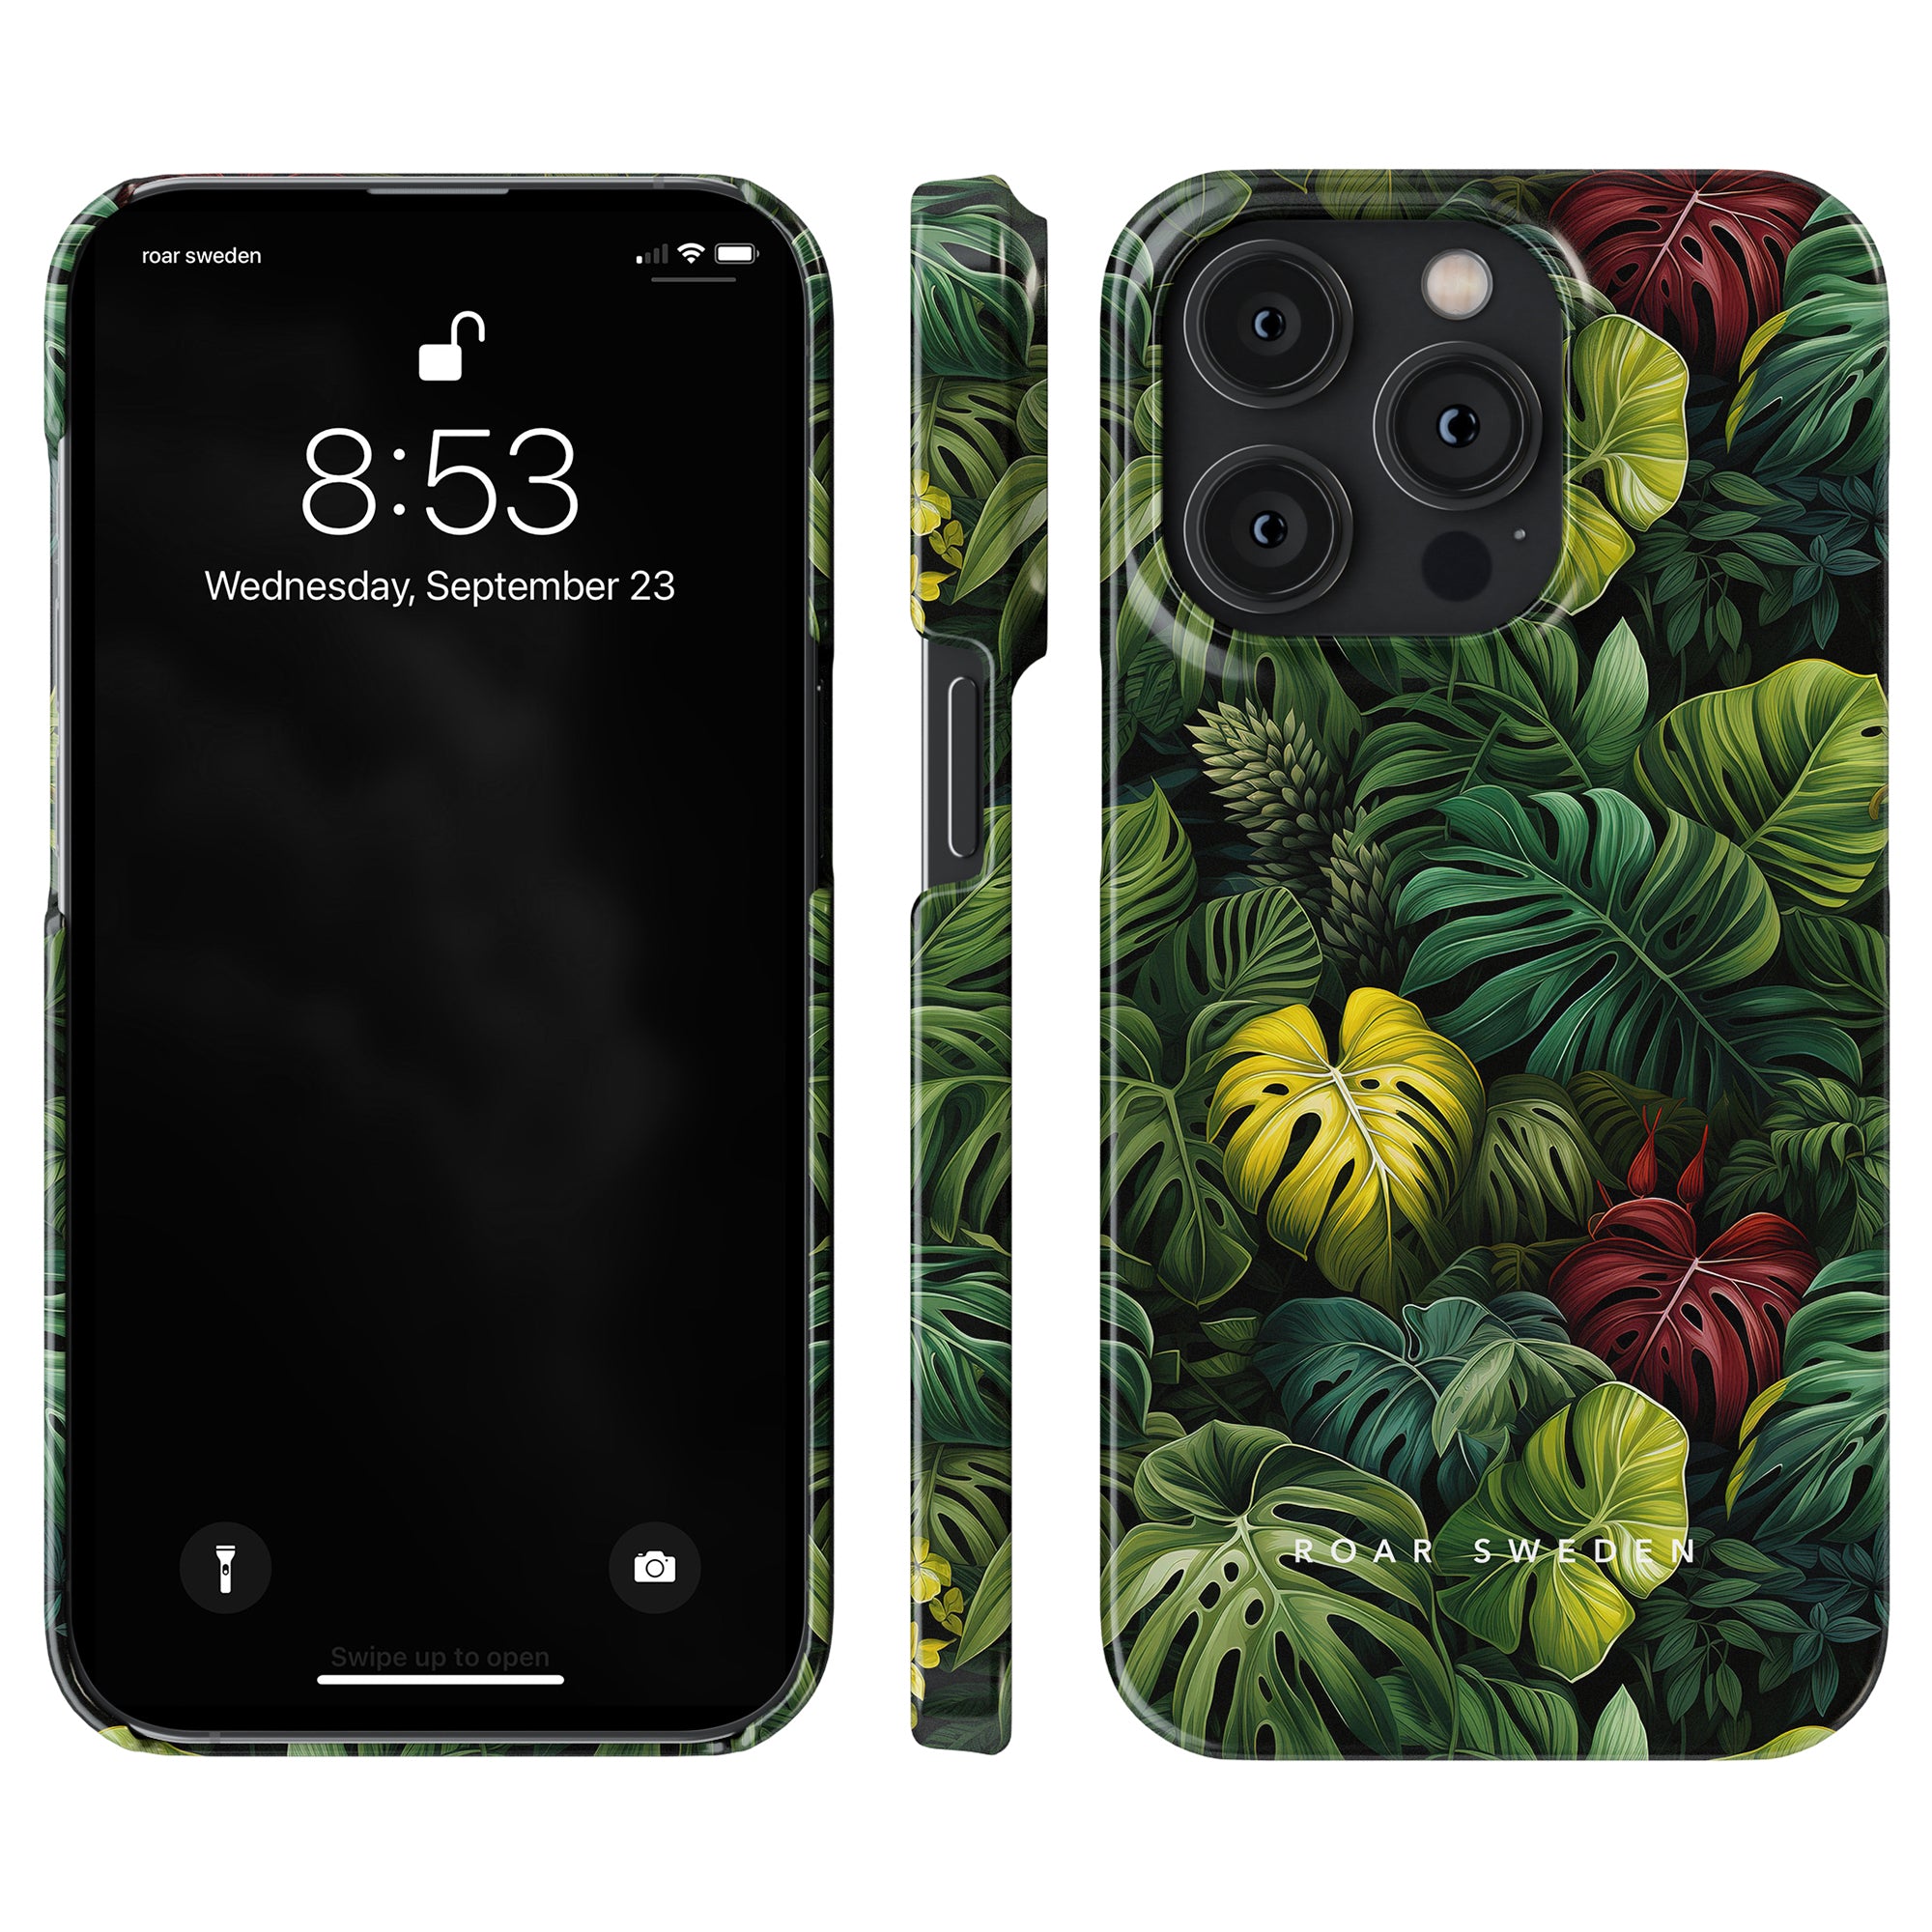 Deliciosa - Slim case in a green leafy design displaying a lock screen showing the time 8:53 and date Wednesday, September 23. The phone case, part of the Jungle Collection, features a tropical Monstera Deliciosa leaf print with the text "ROAR SWEDEN" at the bottom.